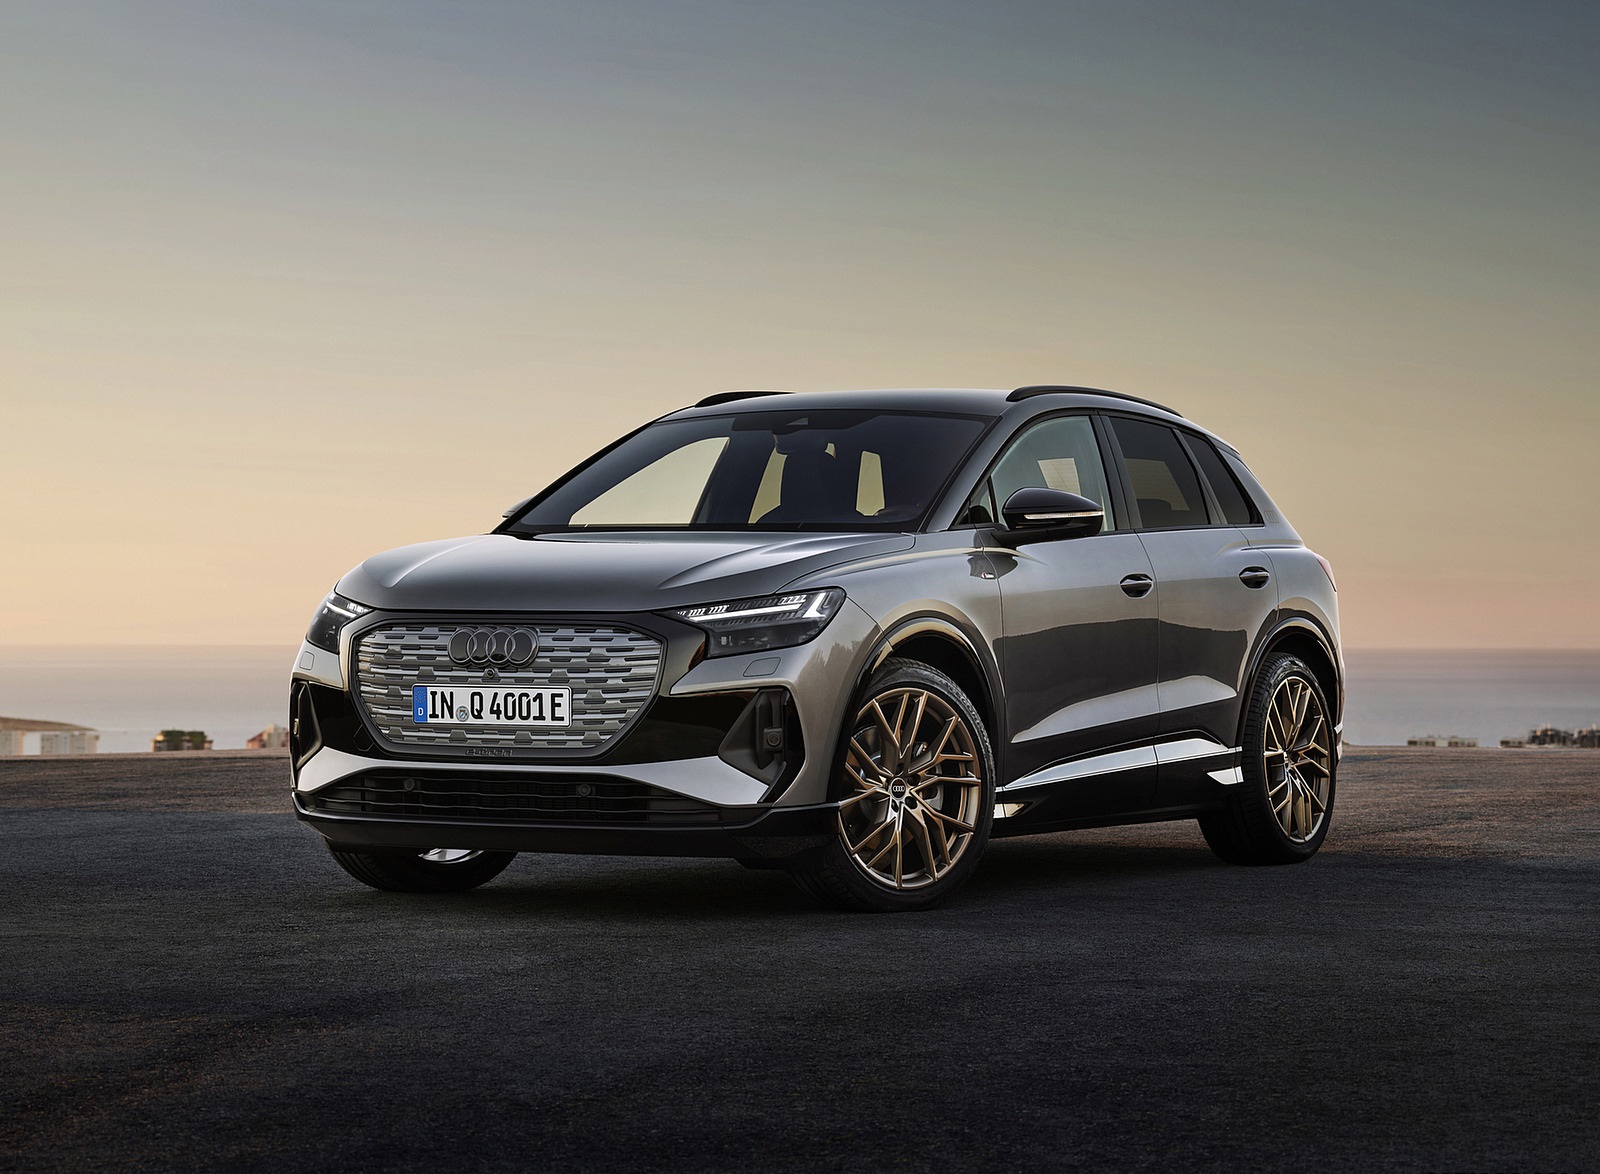 2022 Audi Q4 e-tron (Color: Typhoon Gray) Front Three-Quarter Wallpapers  #122 of 183